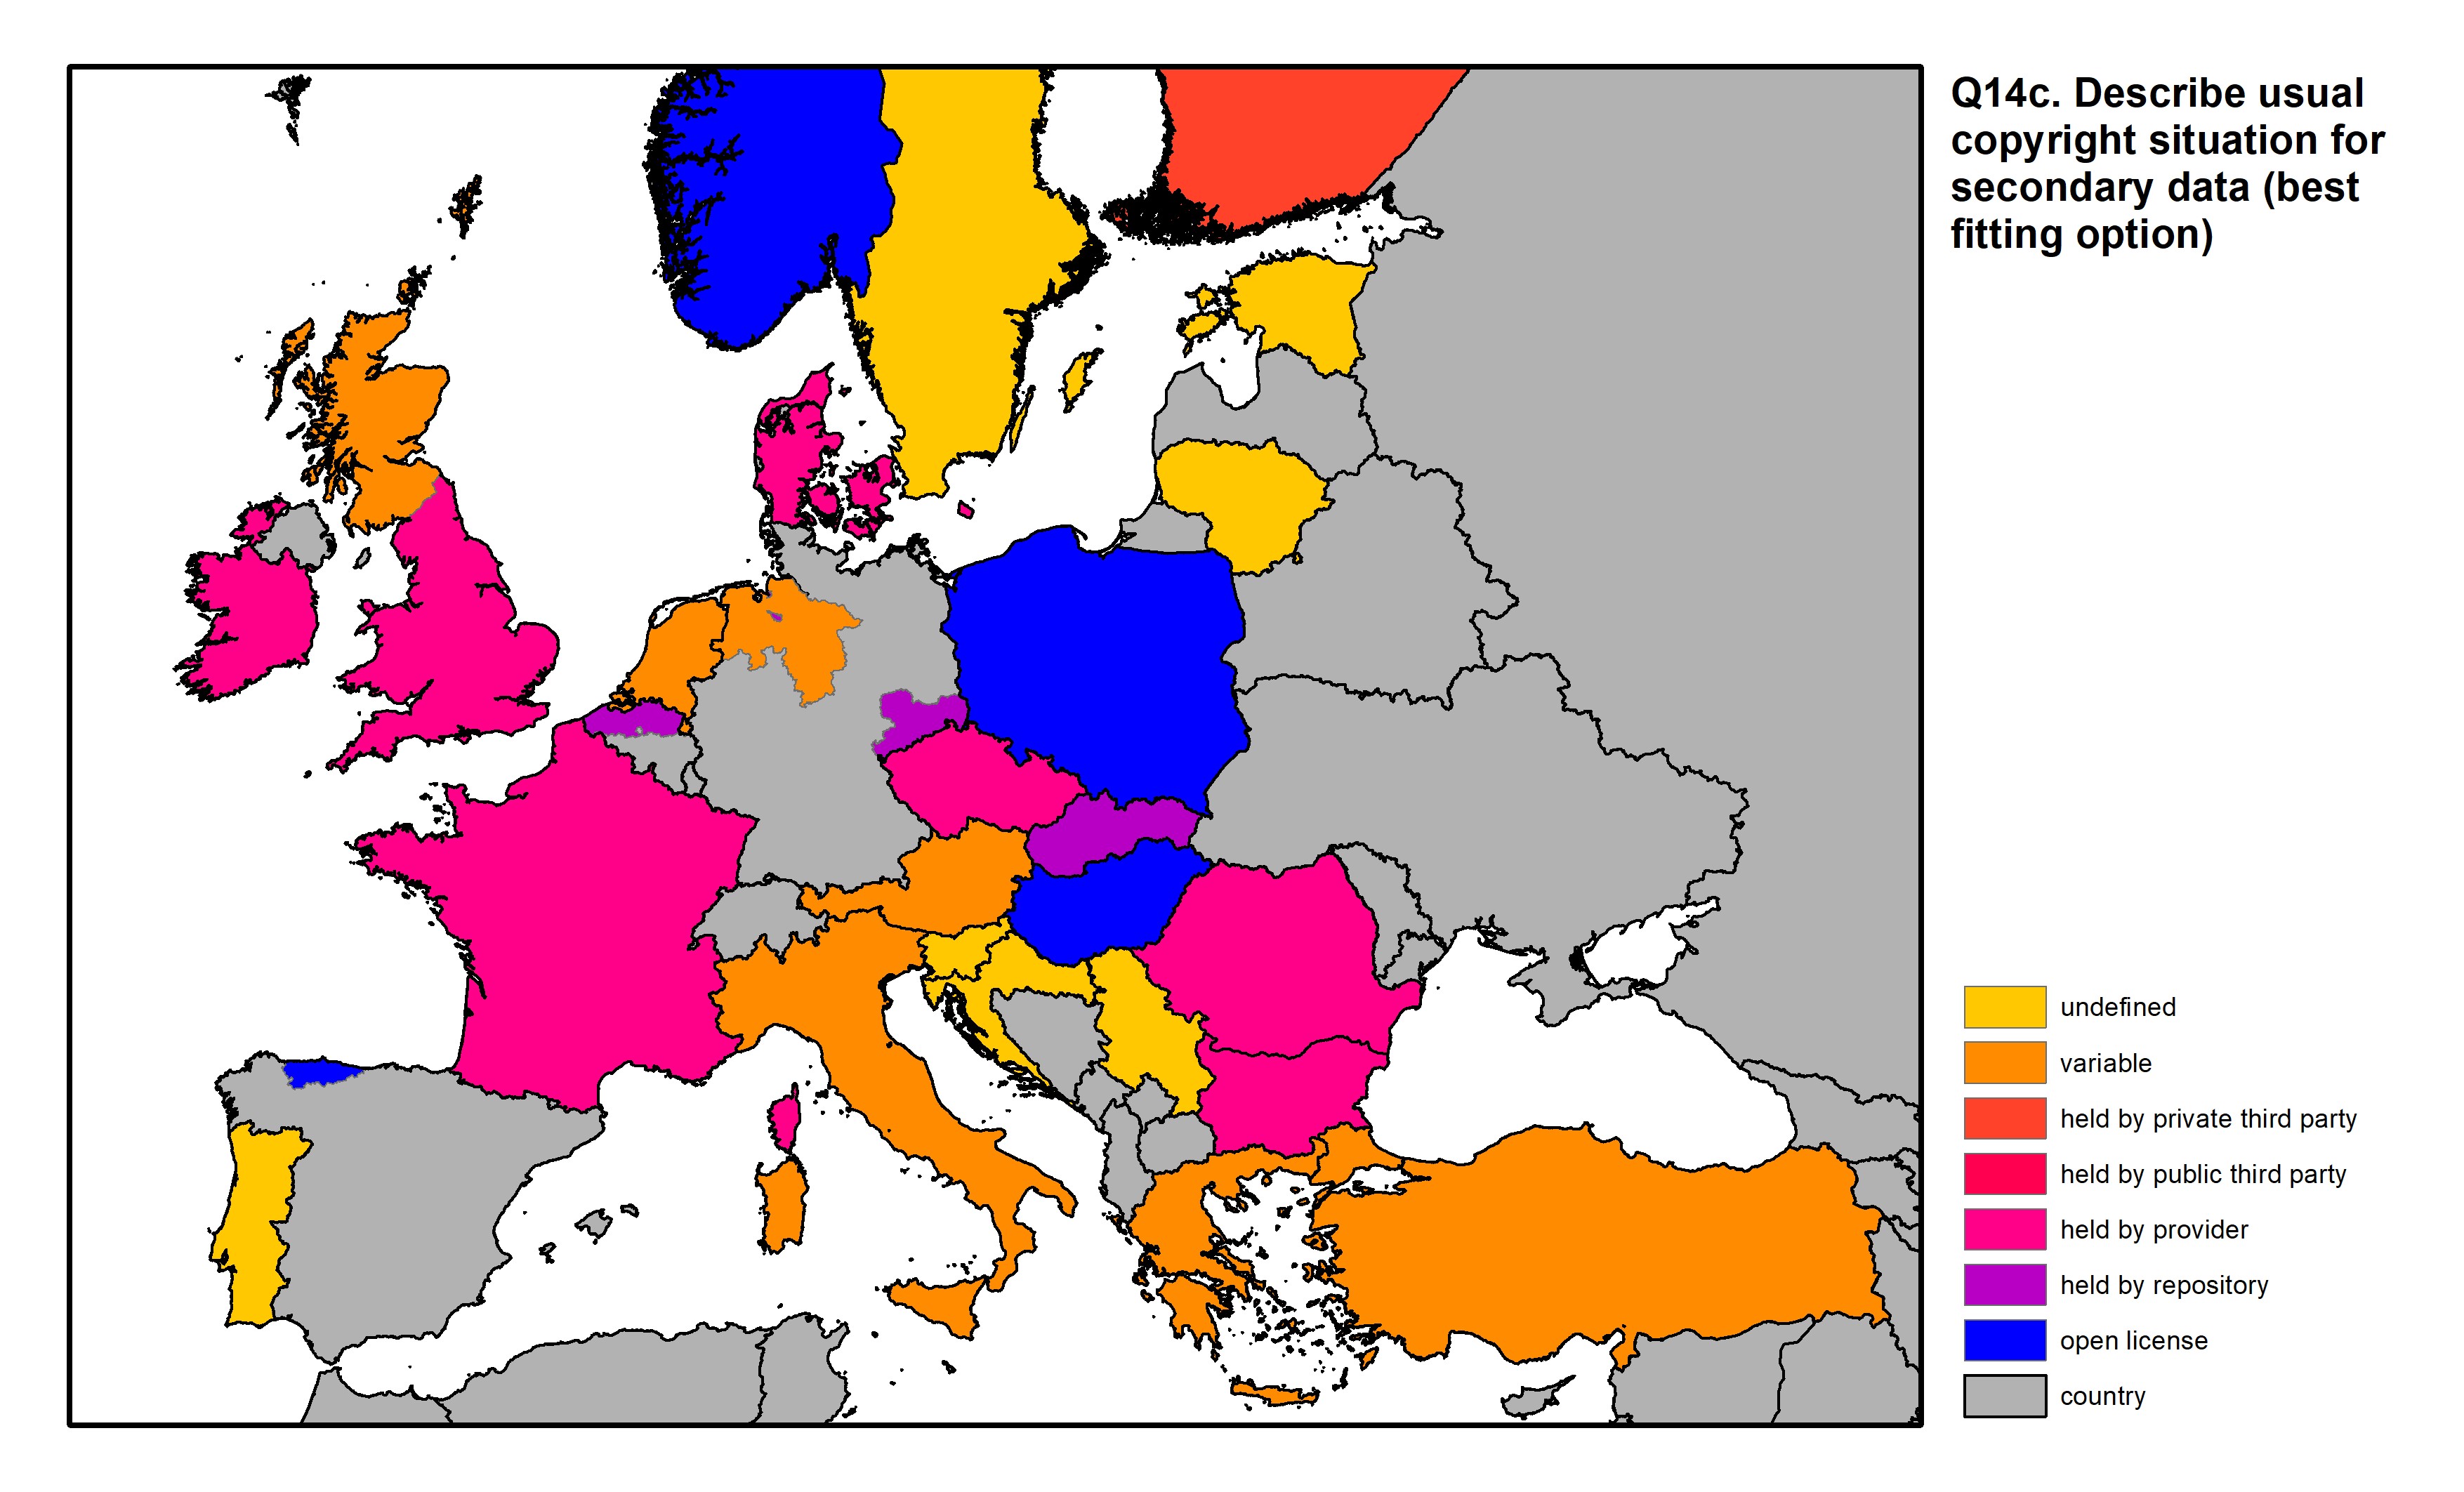 Figure 48: a map of Europe showing countries and regions in colour based on response rates to the survey question.